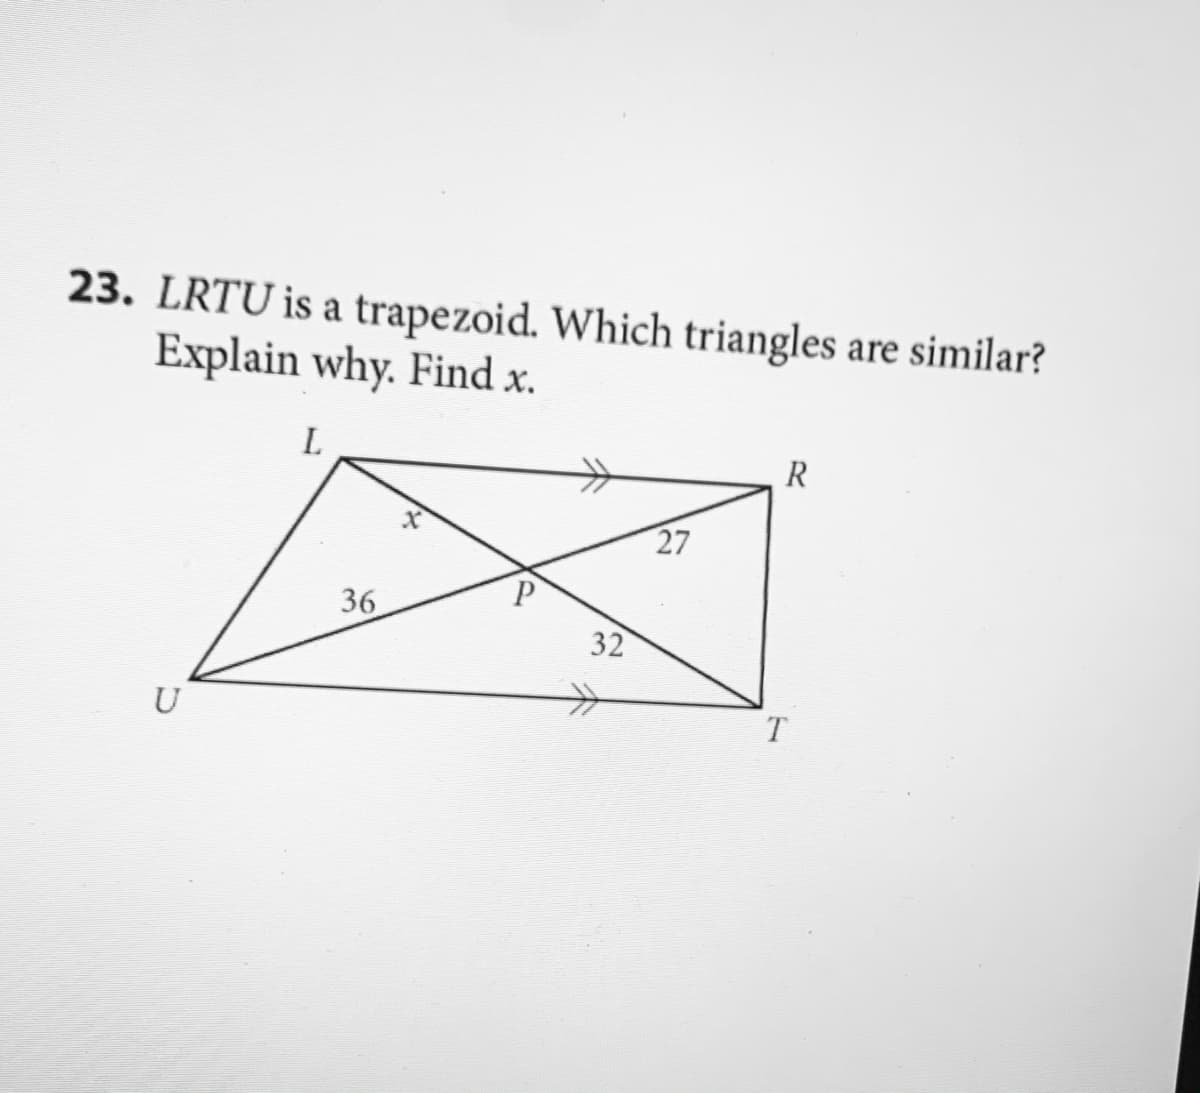 23. LRTU is a trapezoid. Which triangles are similar?
Explain why. Find x.
L
R
27
36
32
U
